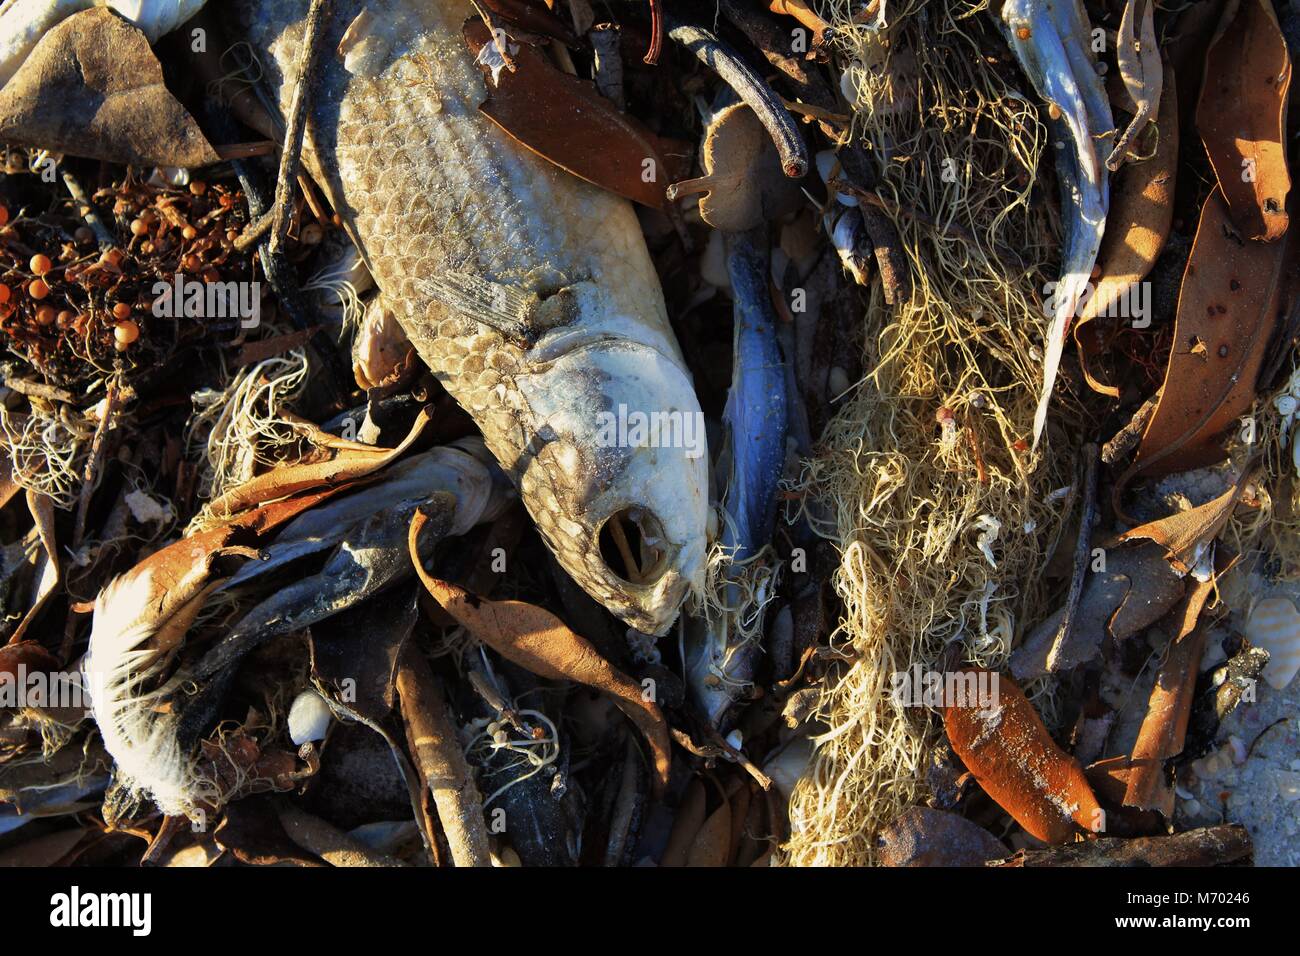 Dead fish washed ashore. Stock Photo